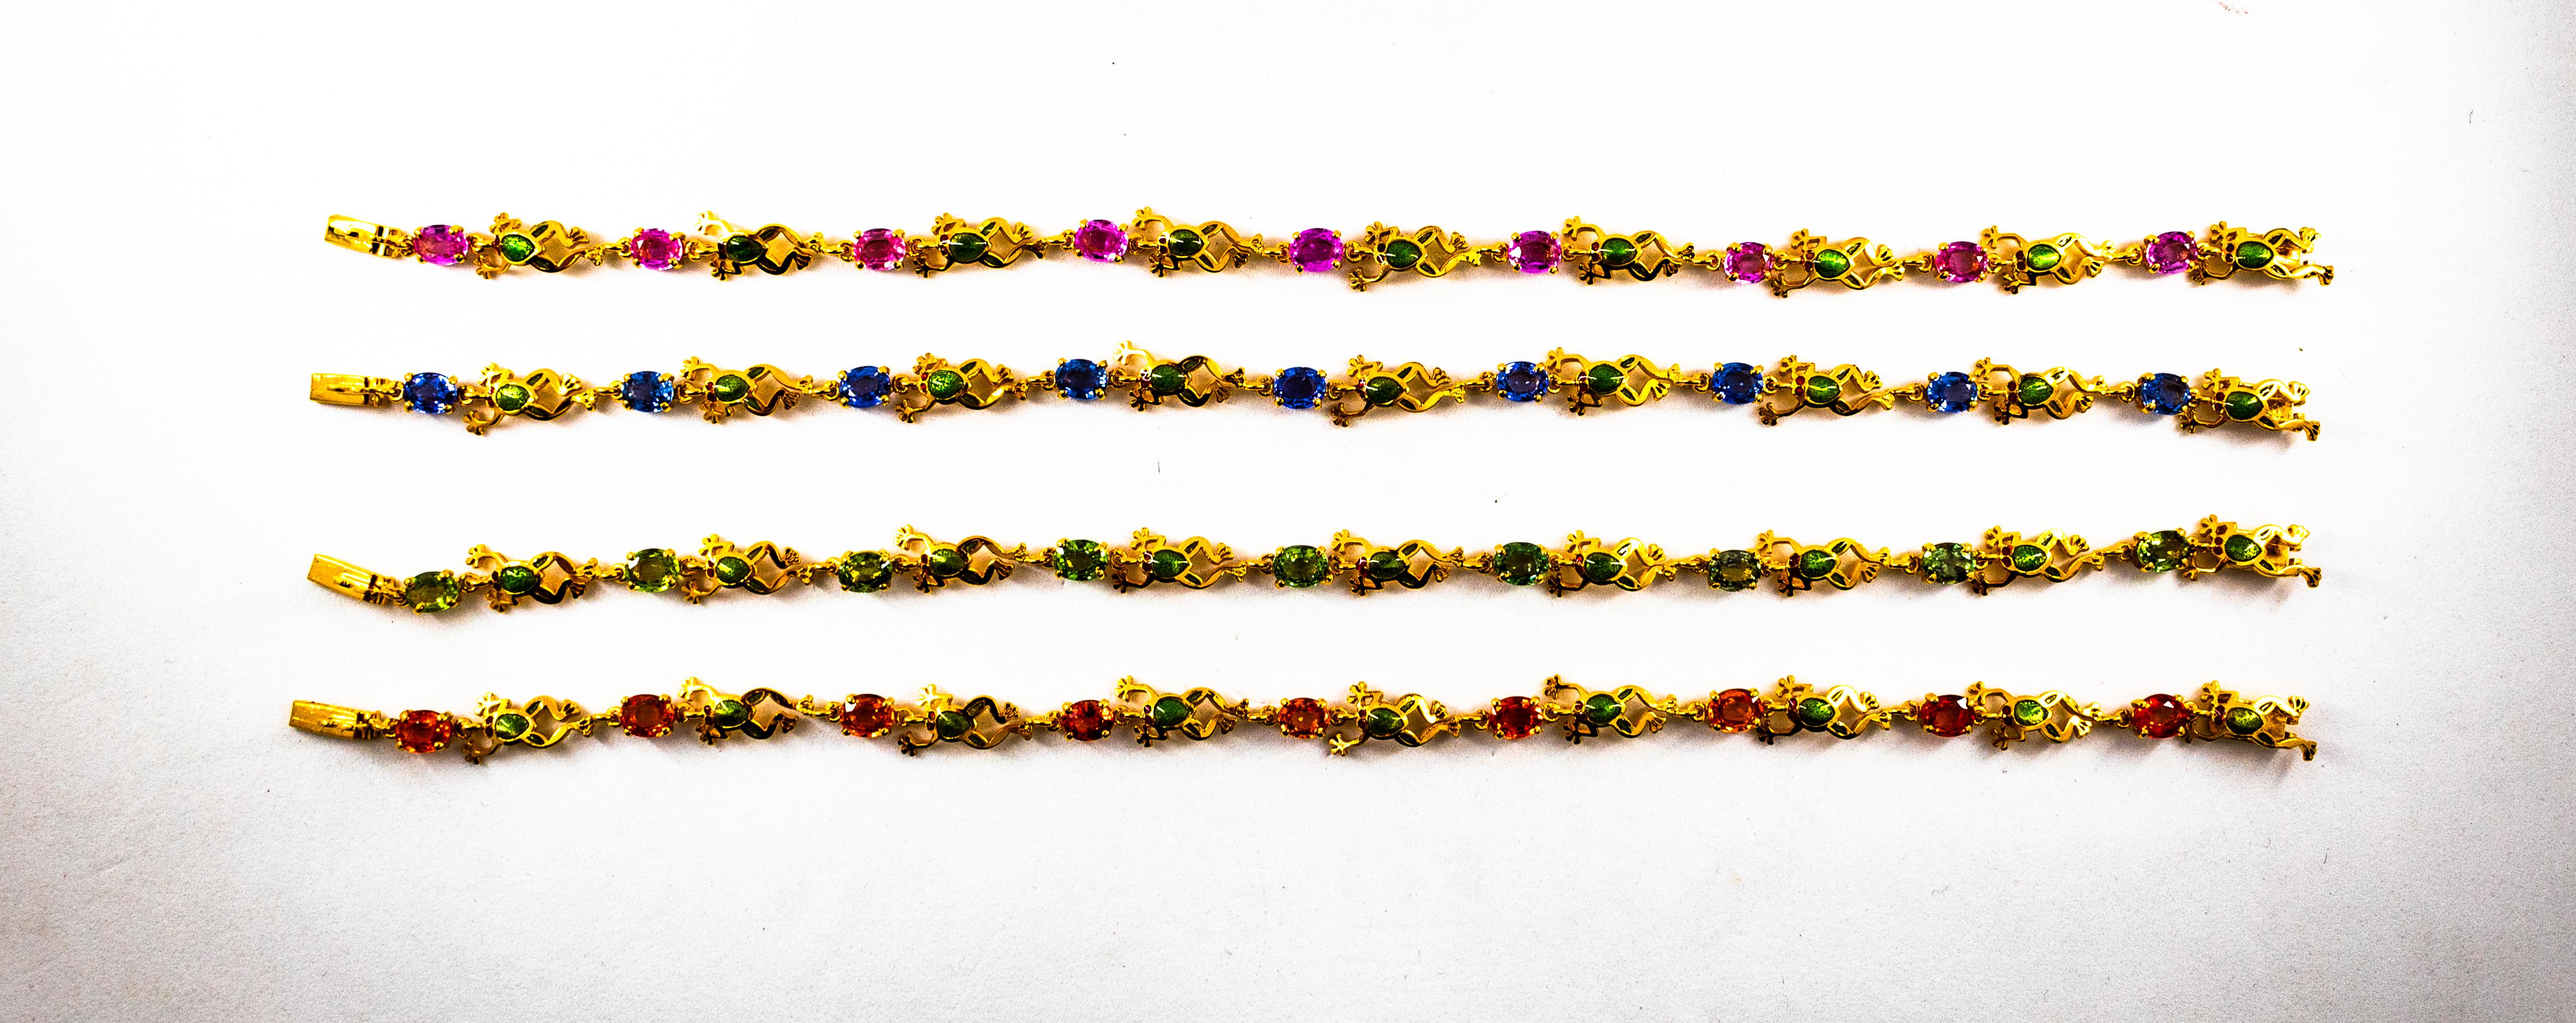 This Bracelet is made of 9K Yellow Gold.
This Bracelet has 4.50 Carats of Yellow Oval Cut Sapphires.
This Bracelet has Enamel.

This Bracelet is available also with a Blue, Pink or Green Sapphires or Peridots.
This Bracelet is available also in 9,